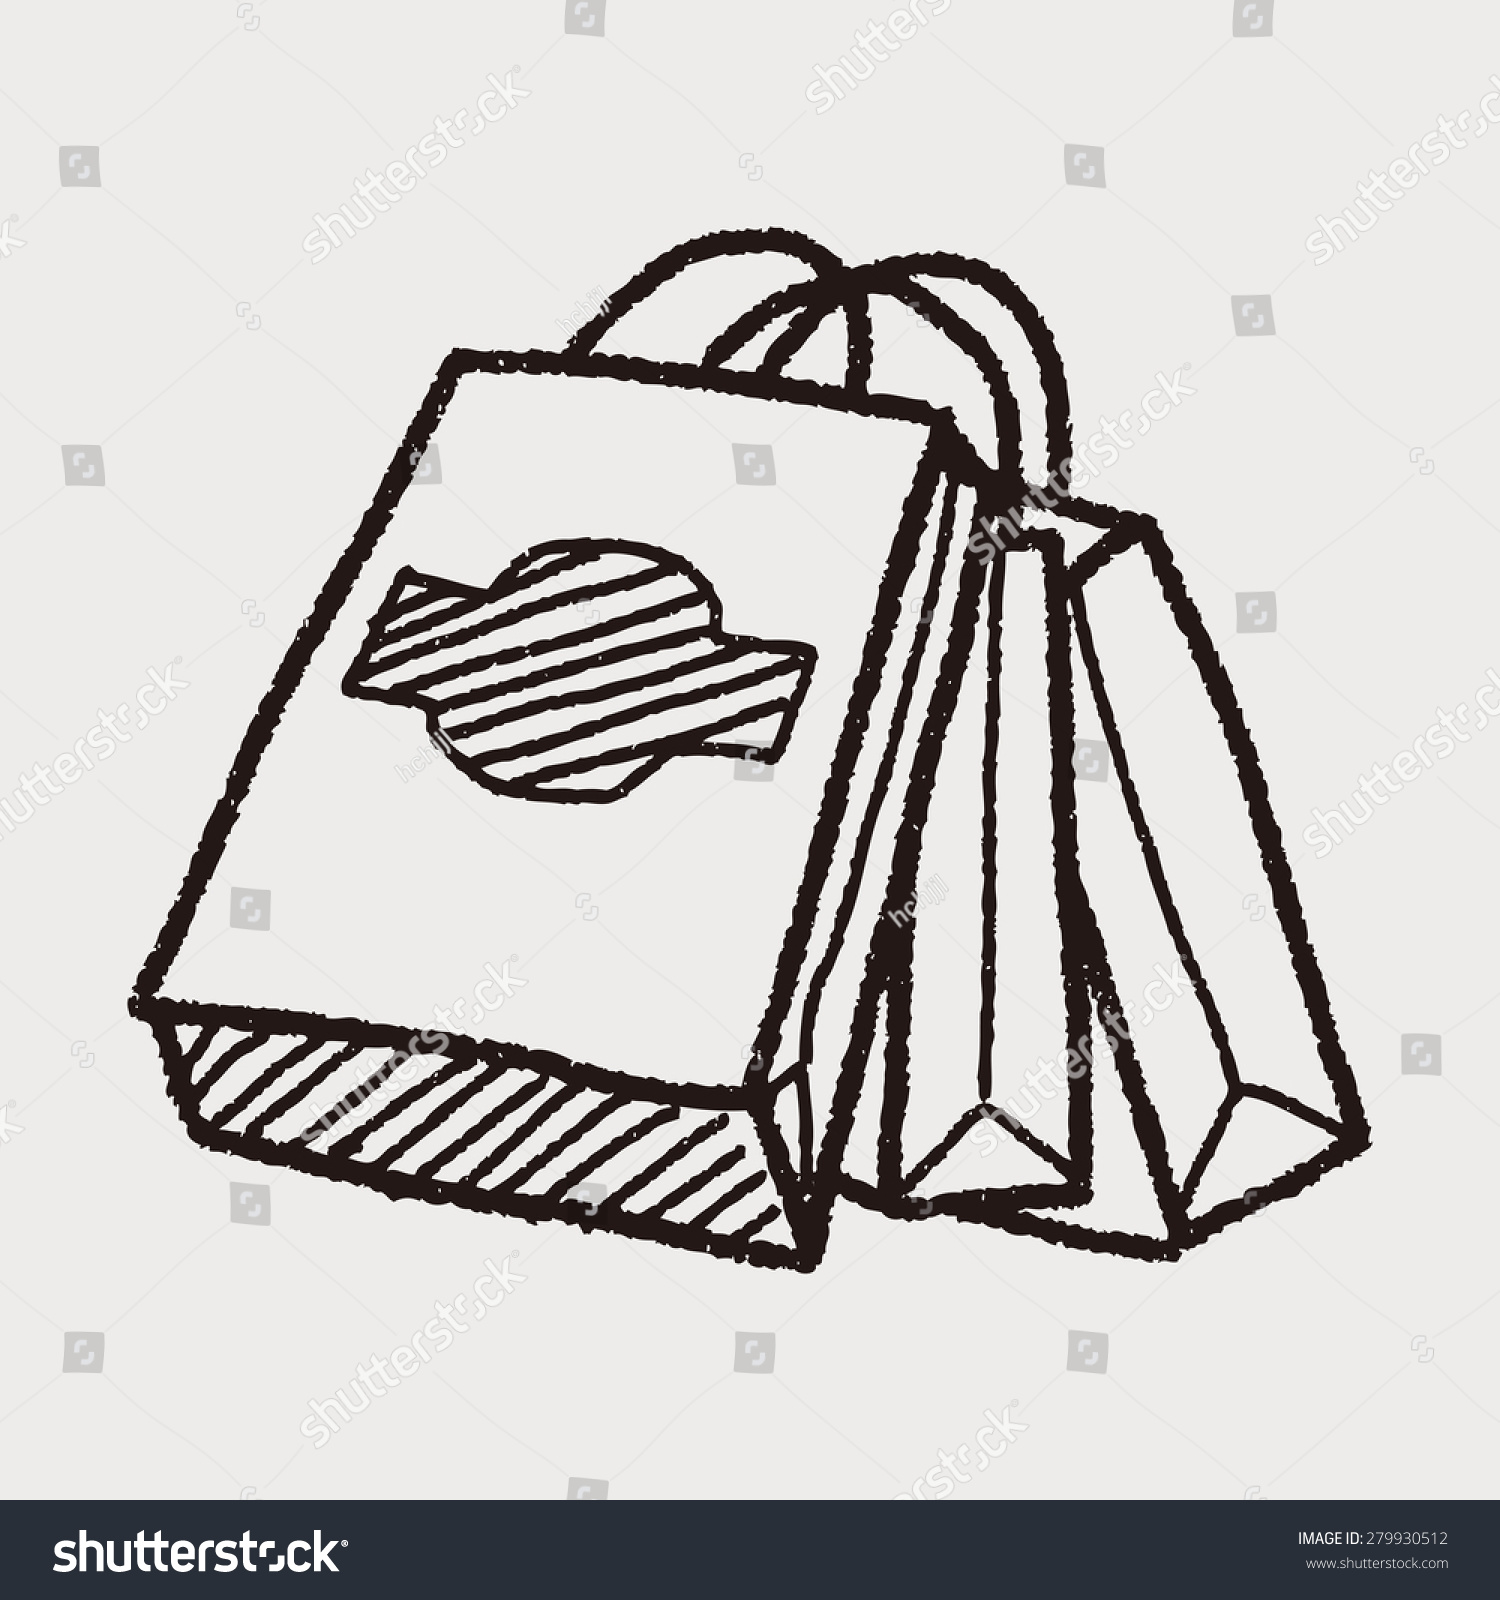 Shopping Bag Doodle Drawing Stock Photo 279930512 : Shutterstock